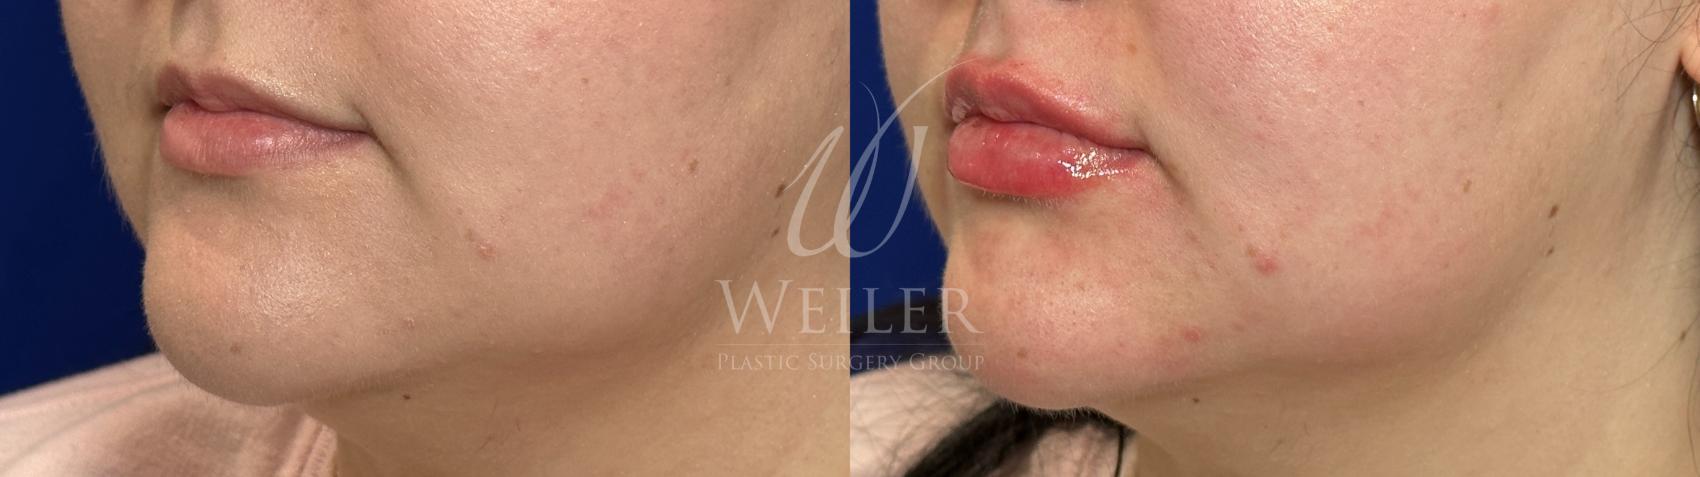 Before & After Lip Augmentation Case 1206 Left Side View in Baton Rouge, New Orleans, & Lafayette, Louisiana